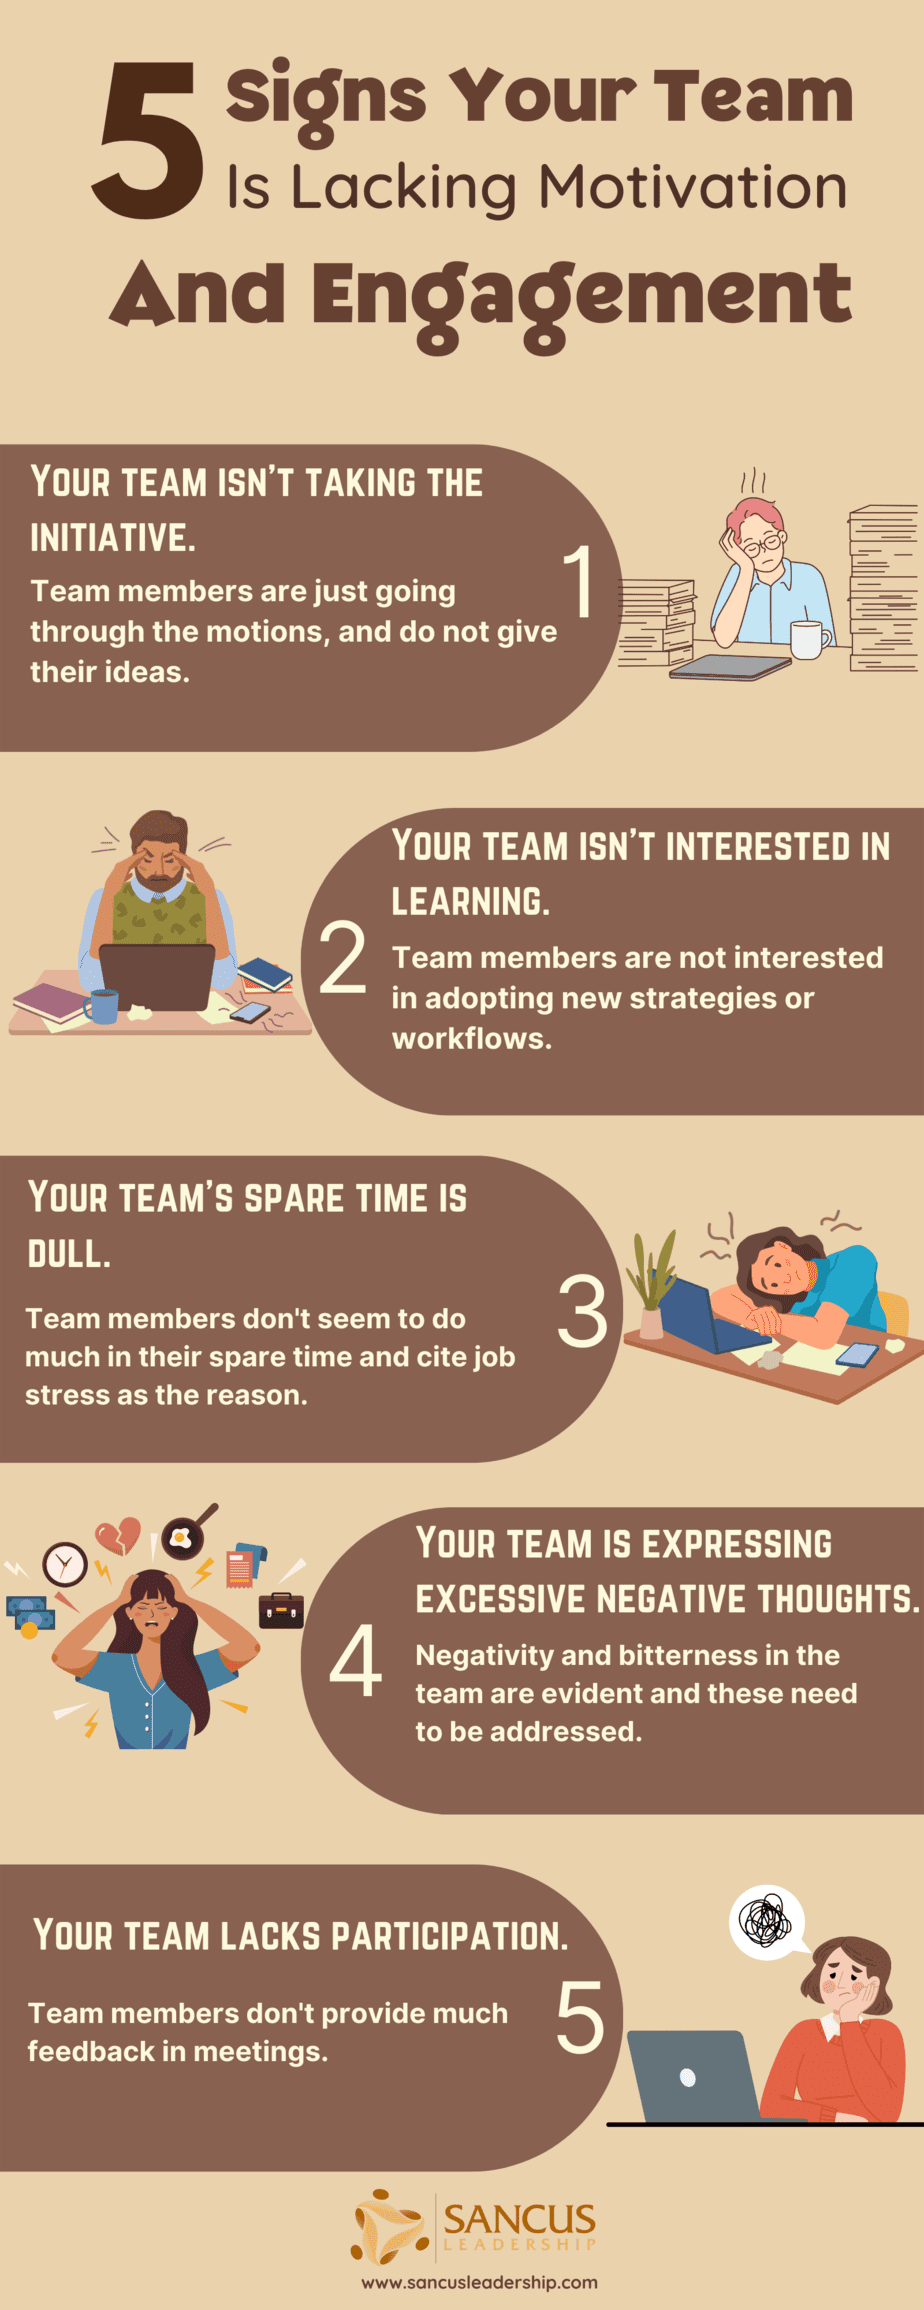 5 Signs Your Team Is Lacking Motivation and Engagement